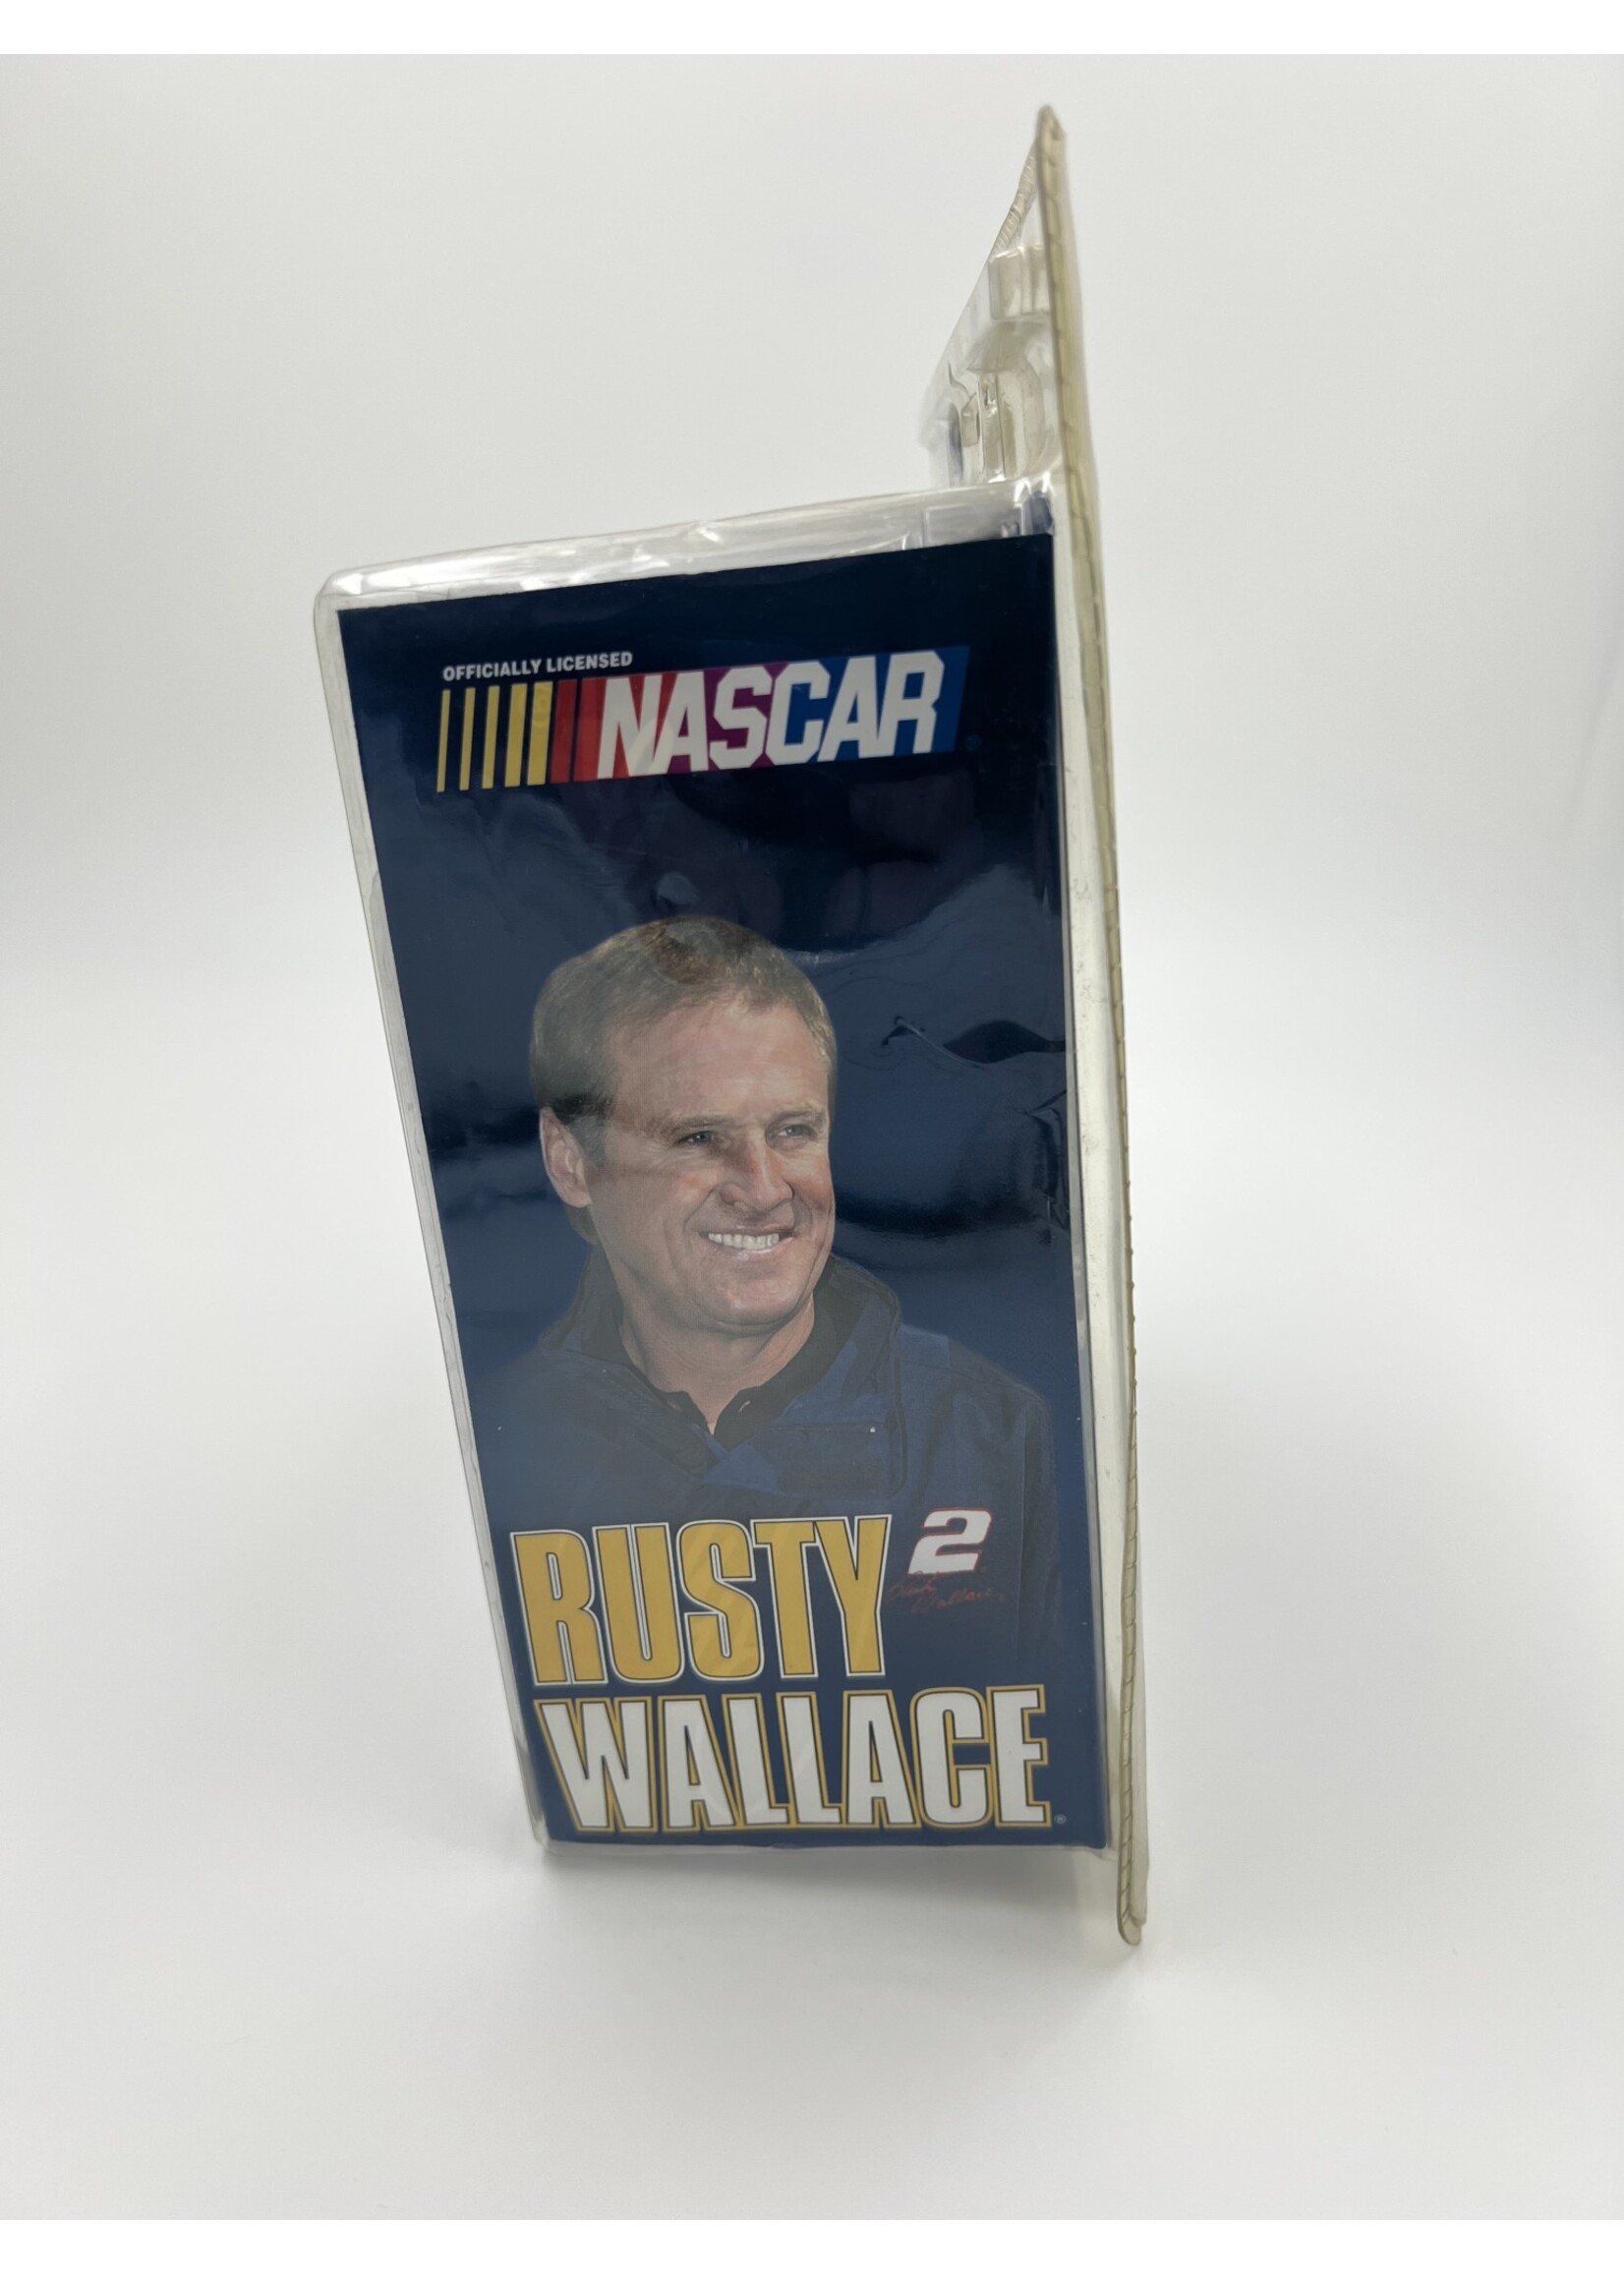 Action Figures Rusty Wallace Nascar McFarlane Mature Collection Limited Edition